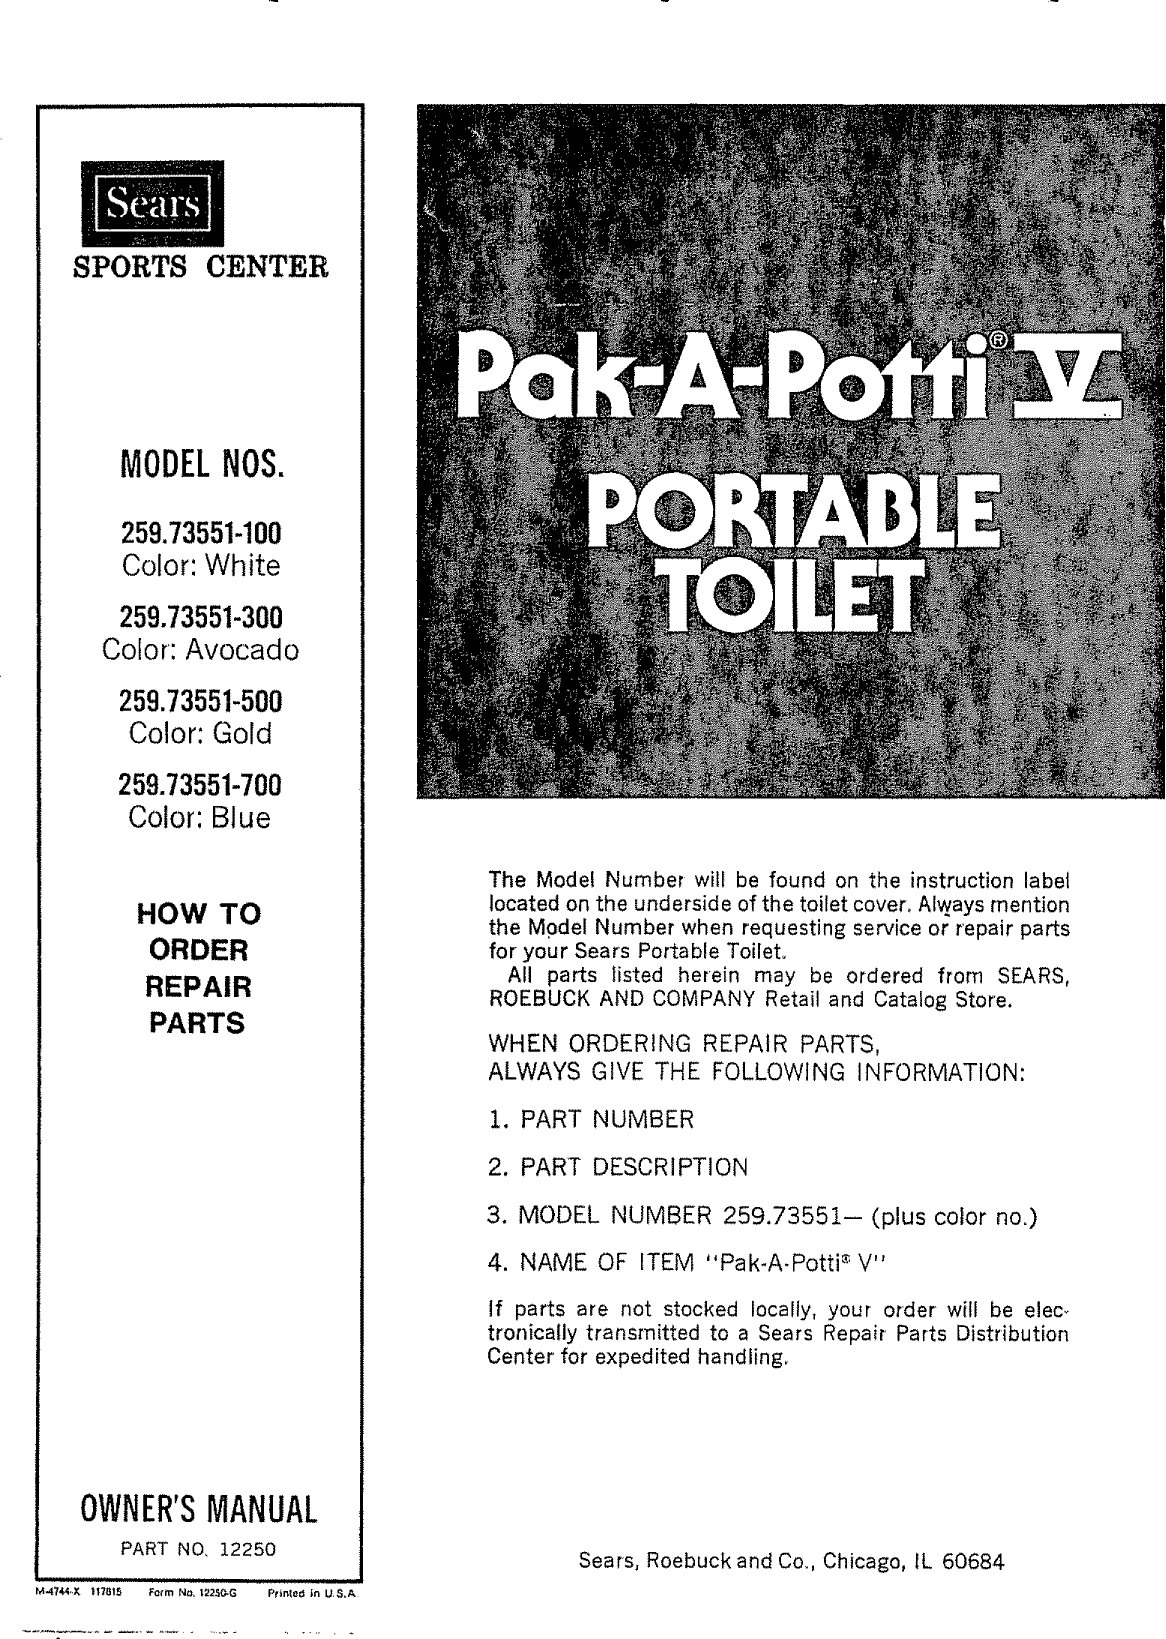 Page 4 of 4 - Sears 25973551-100 L0911520 User Manual  PAK-A-POTTI V PORTABLE TOILET - Manuals And Guides